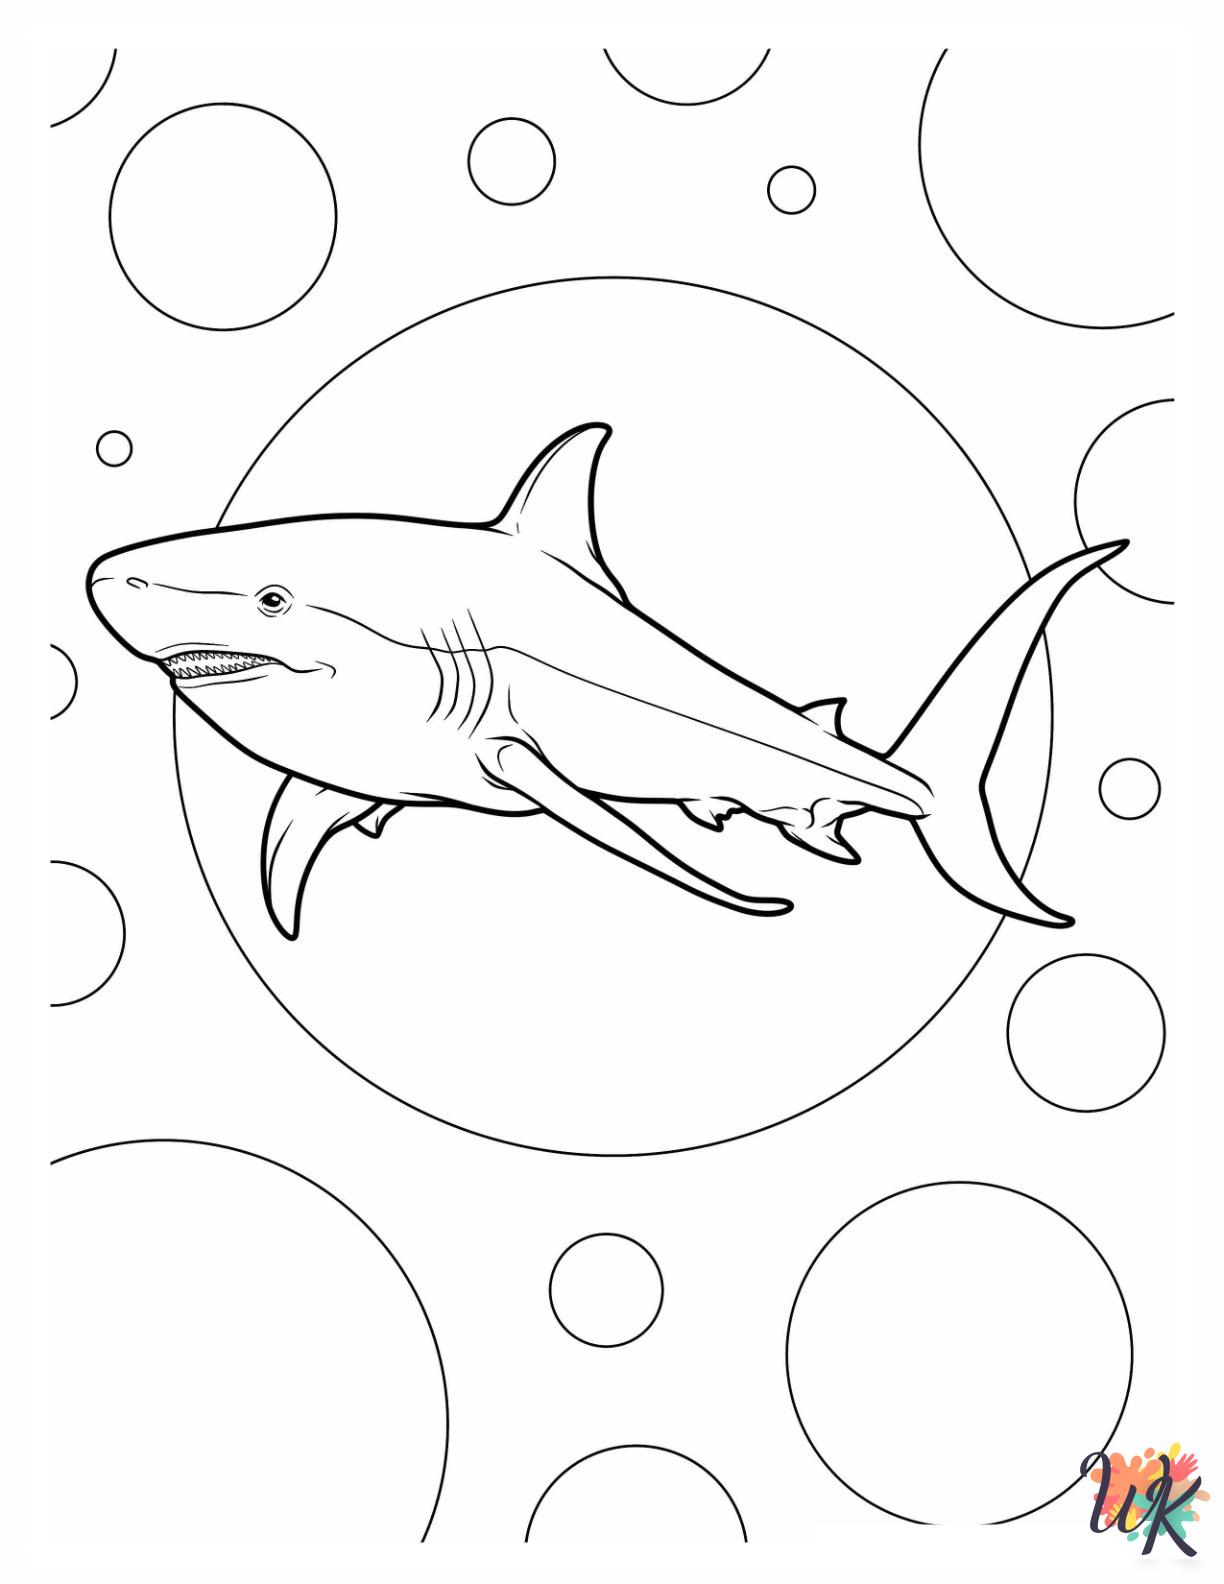 Shark adult coloring pages